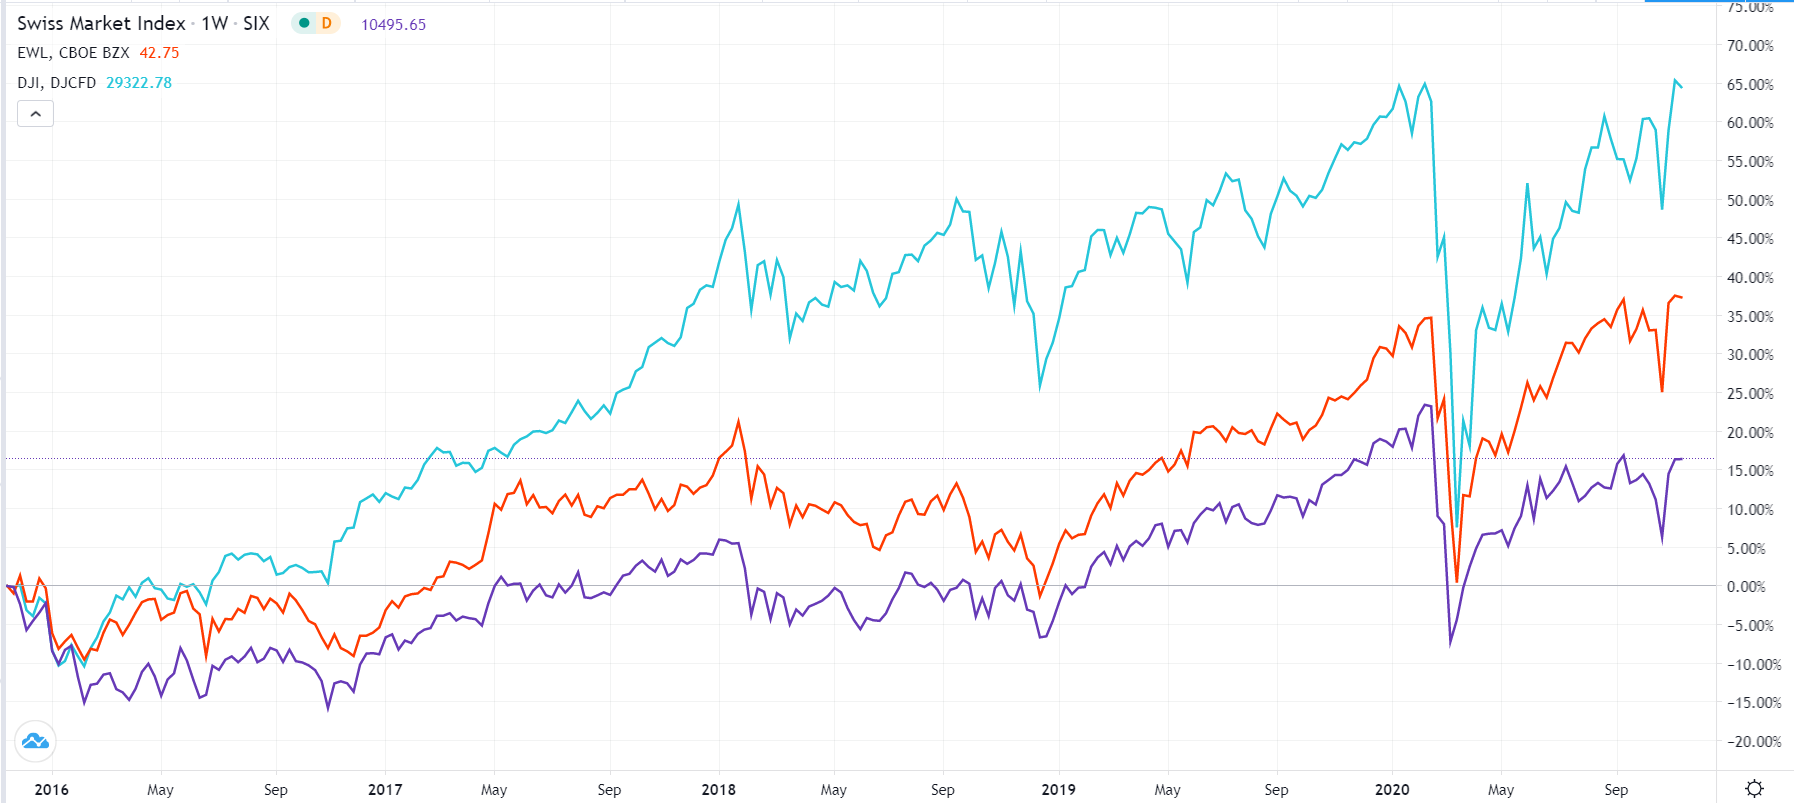 EWL performance against the Dow Jones and S&P 500